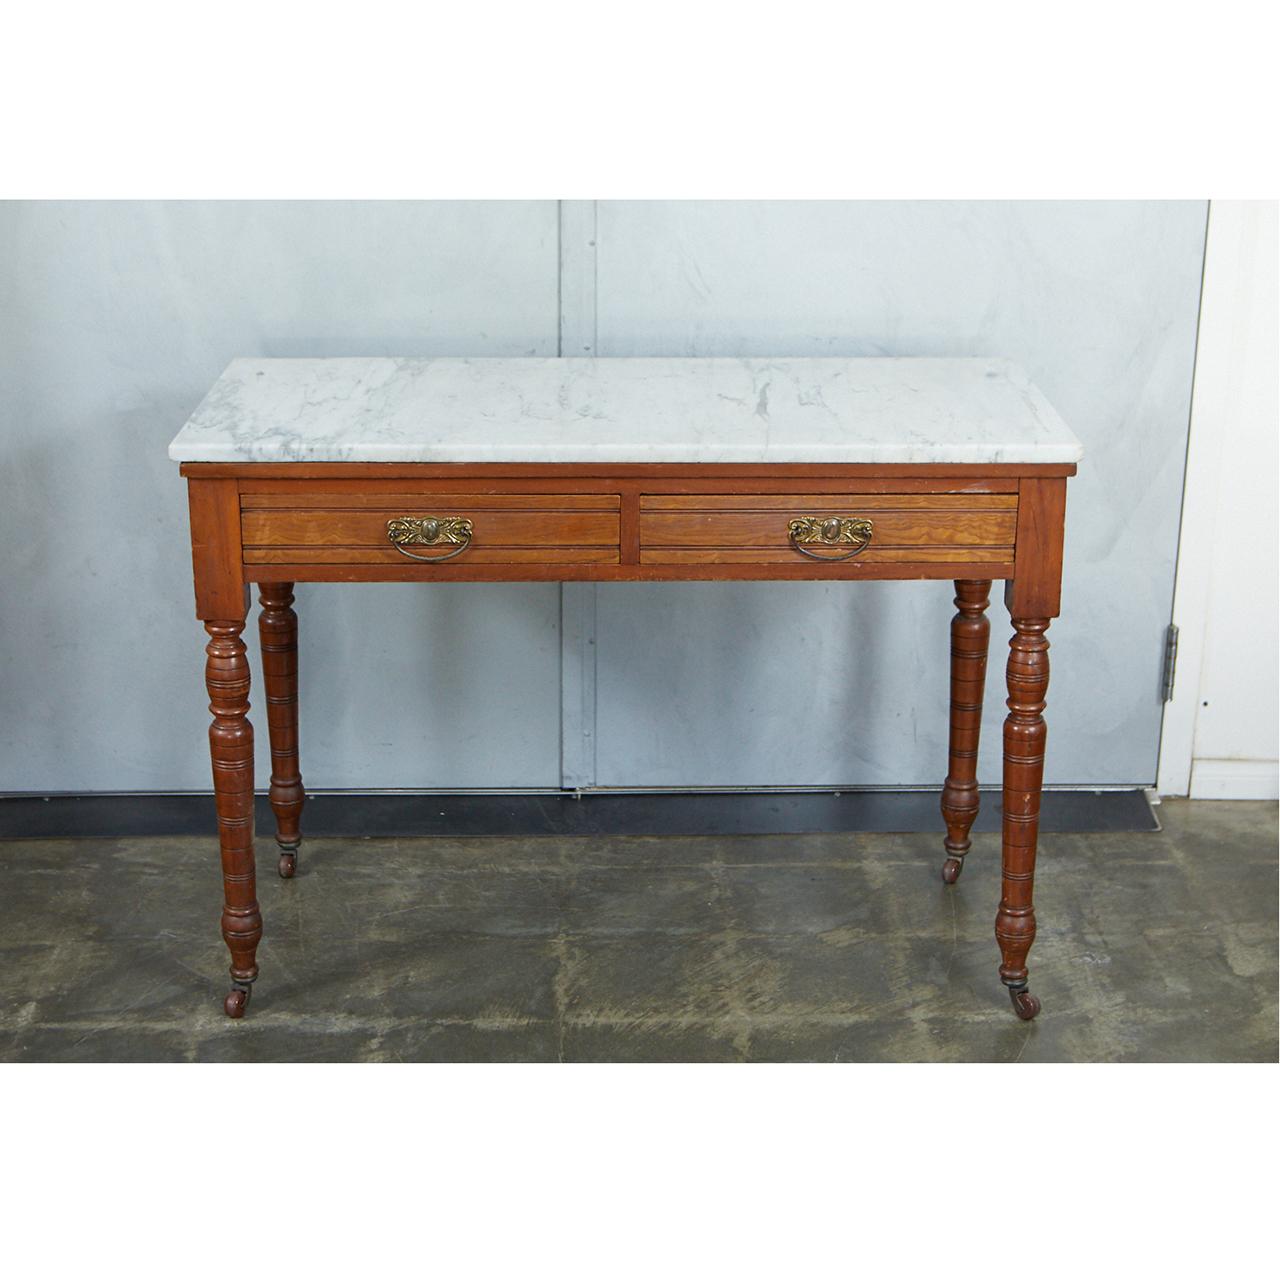 A very nice English marble-top table from the 19th century, originally used as a washstand. The table has two-drawers with brass drop pull handles. This piece has nicely turned legs standing on casters. The diminutive size of this table makes it a